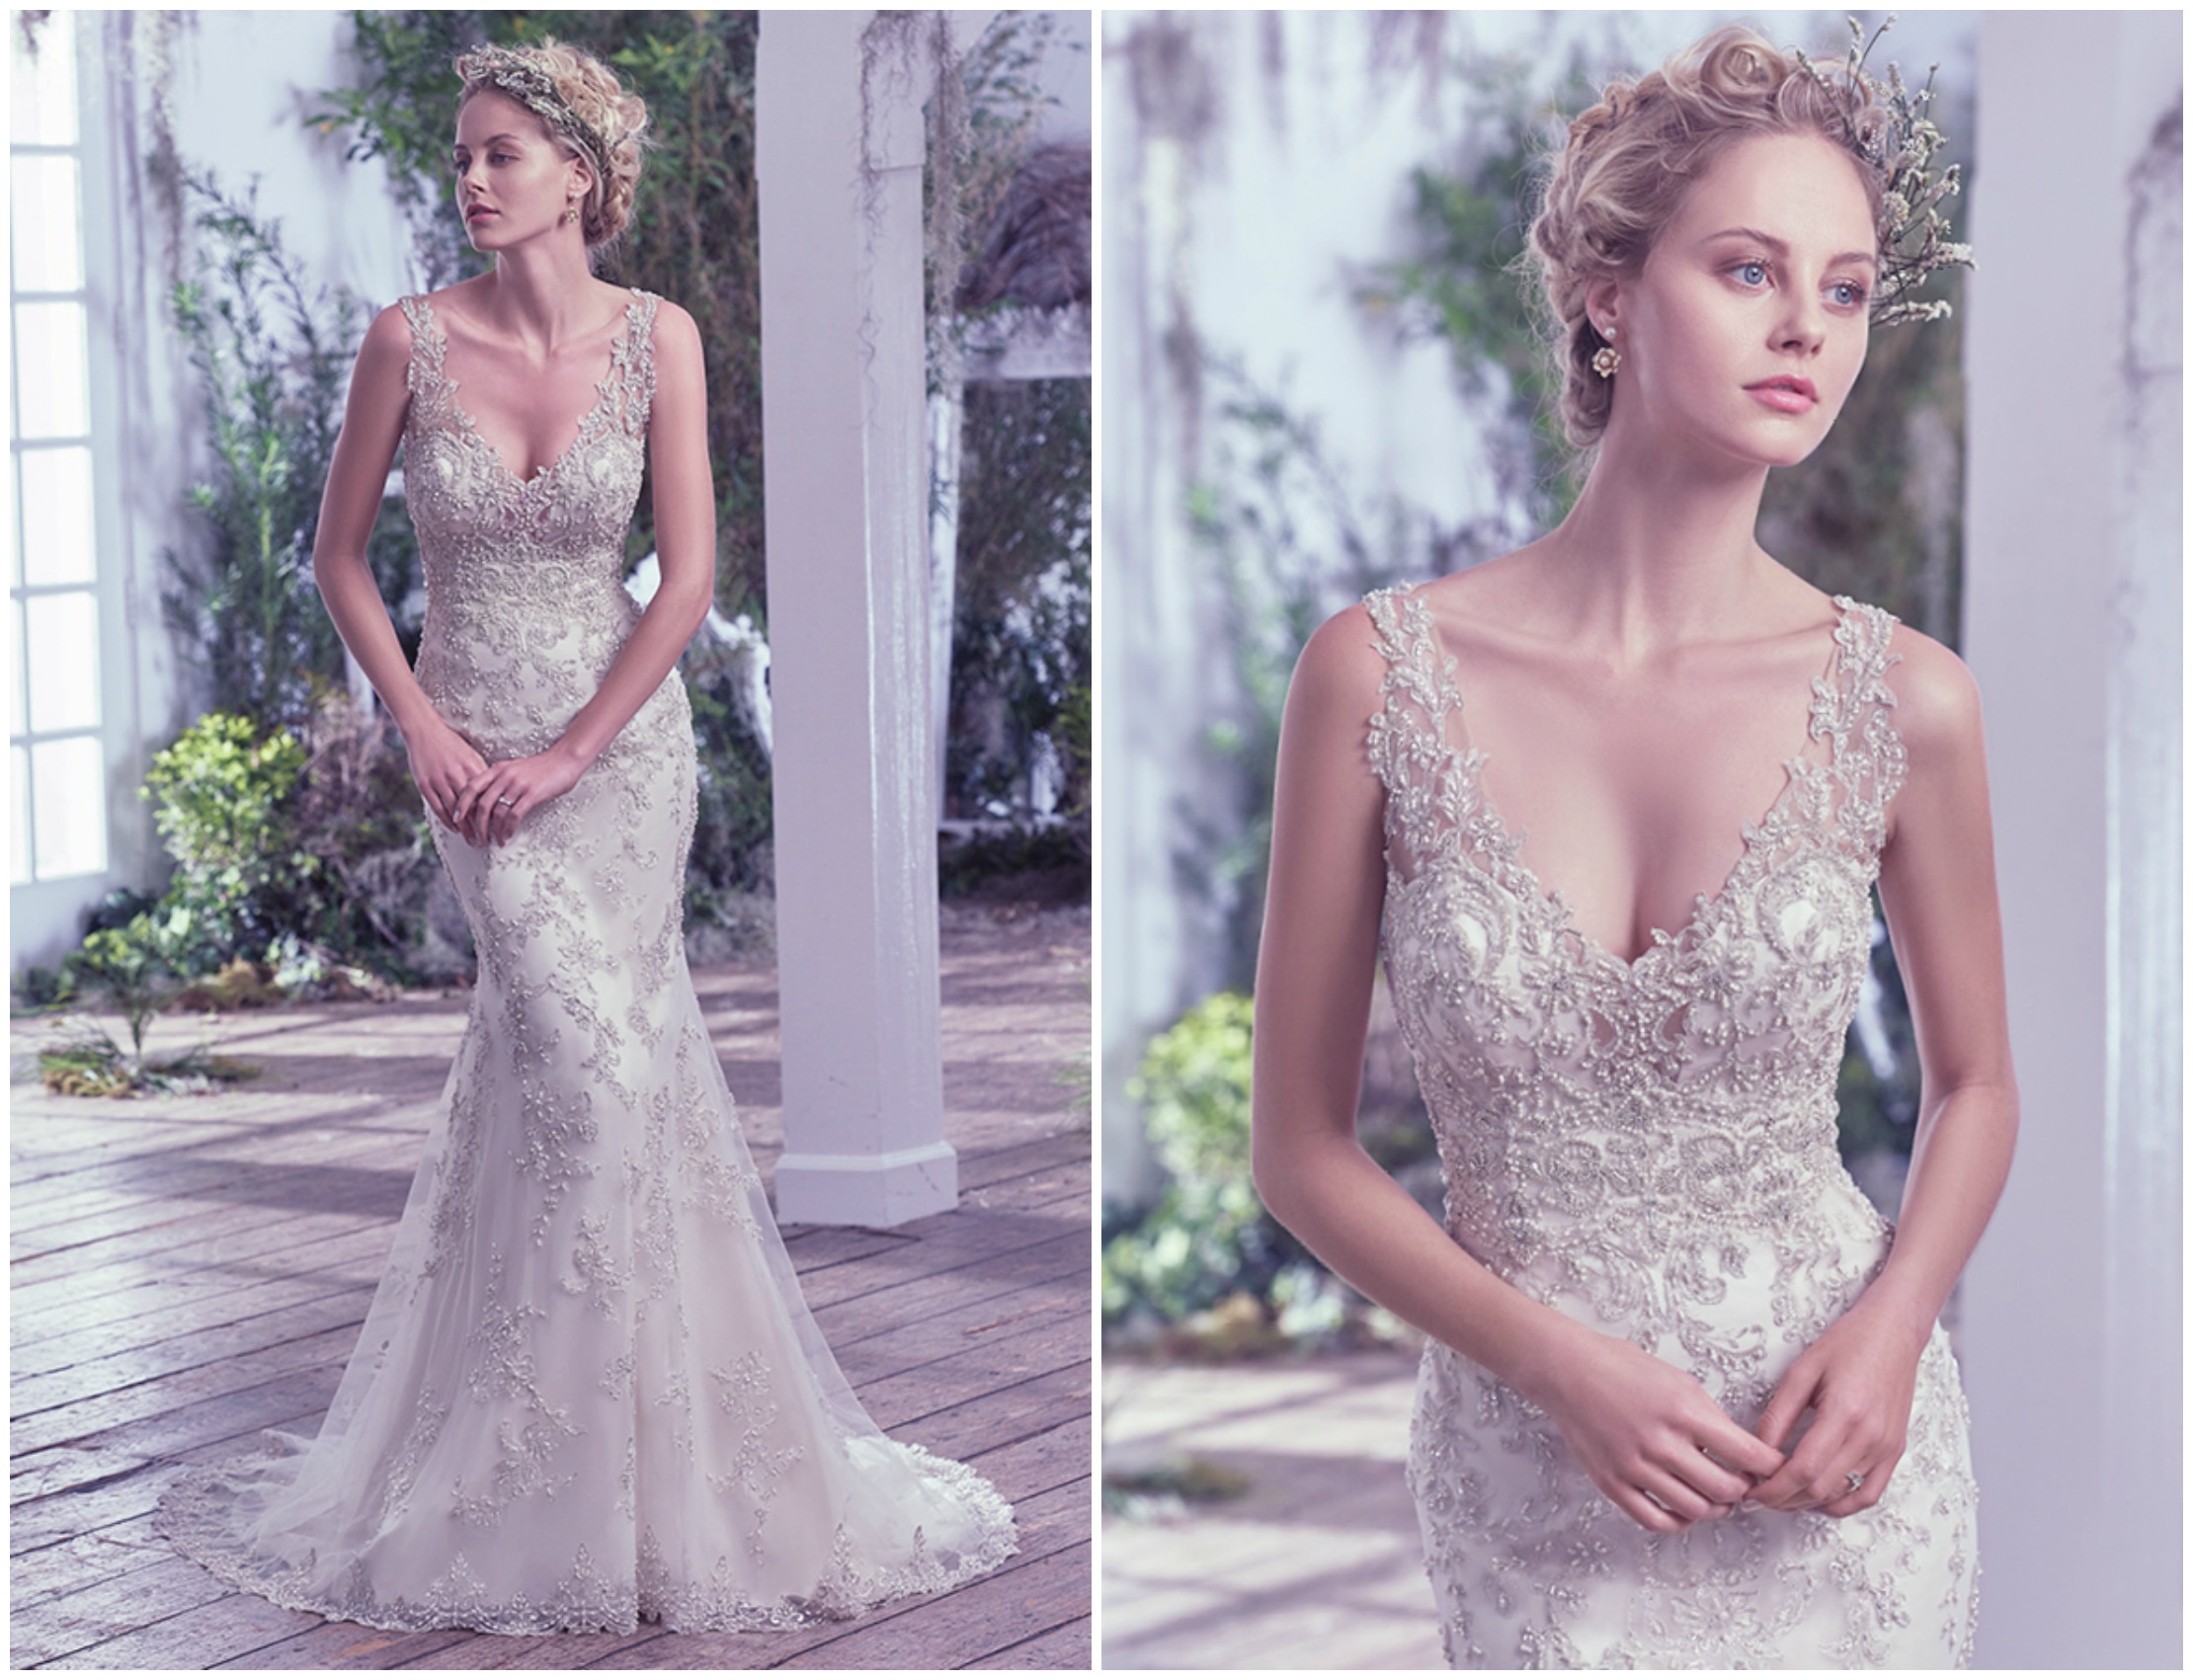 This bead embellished sheath wedding dress features Swarovski crystals. The illusion straps and plunging V-neckline add statement-making glamour. Finished with stunning scoop open back and zipper closure. 

<a href="https://www.maggiesottero.com/maggie-sottero/greer/9692" target="_blank">Maggie Sottero</a>